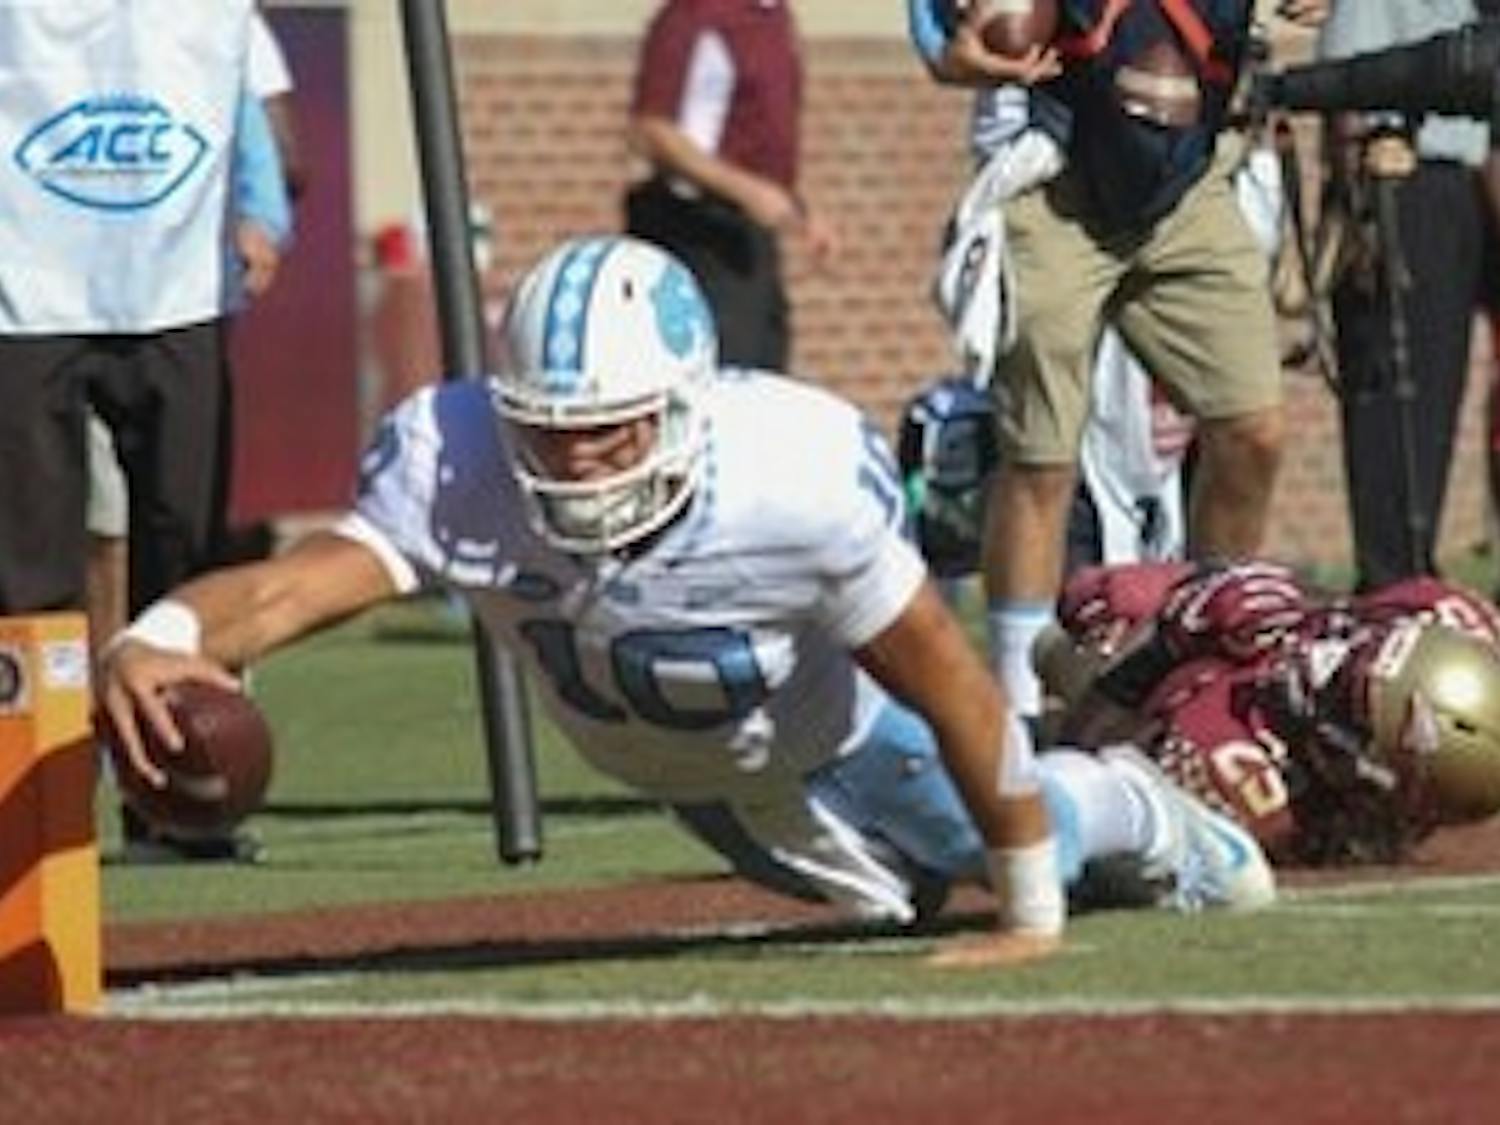 Former UNC quarterback Mitch Trubisky dives for the end zone against Florida State in 2016.